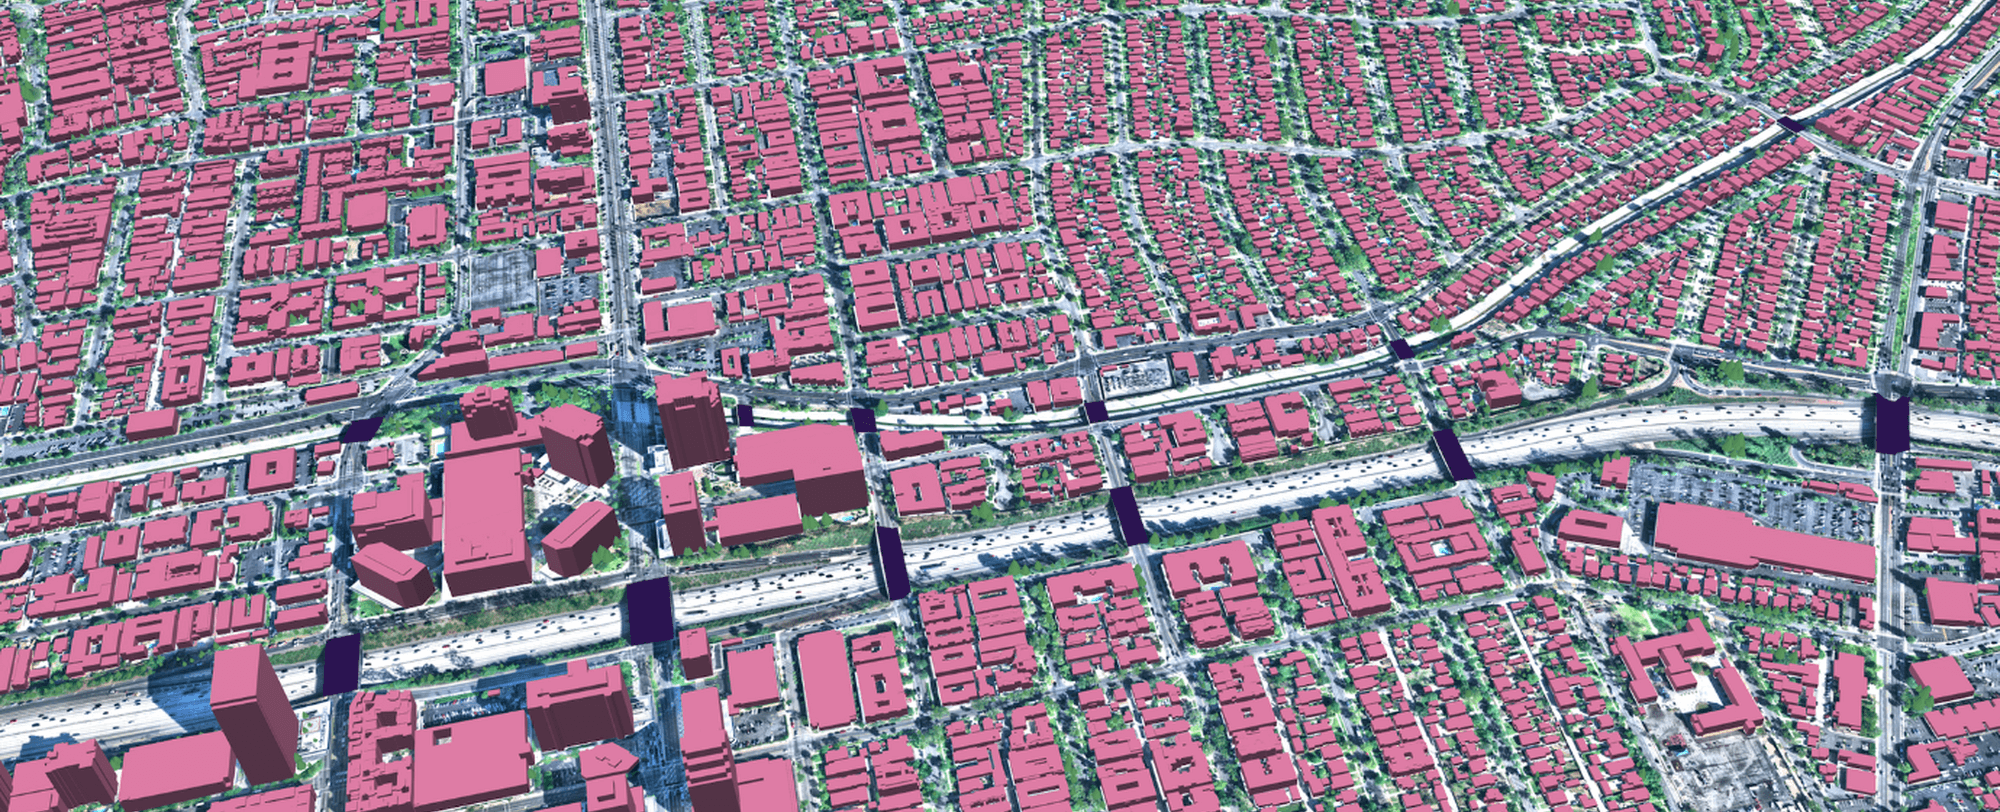 3D nationwide land cover data